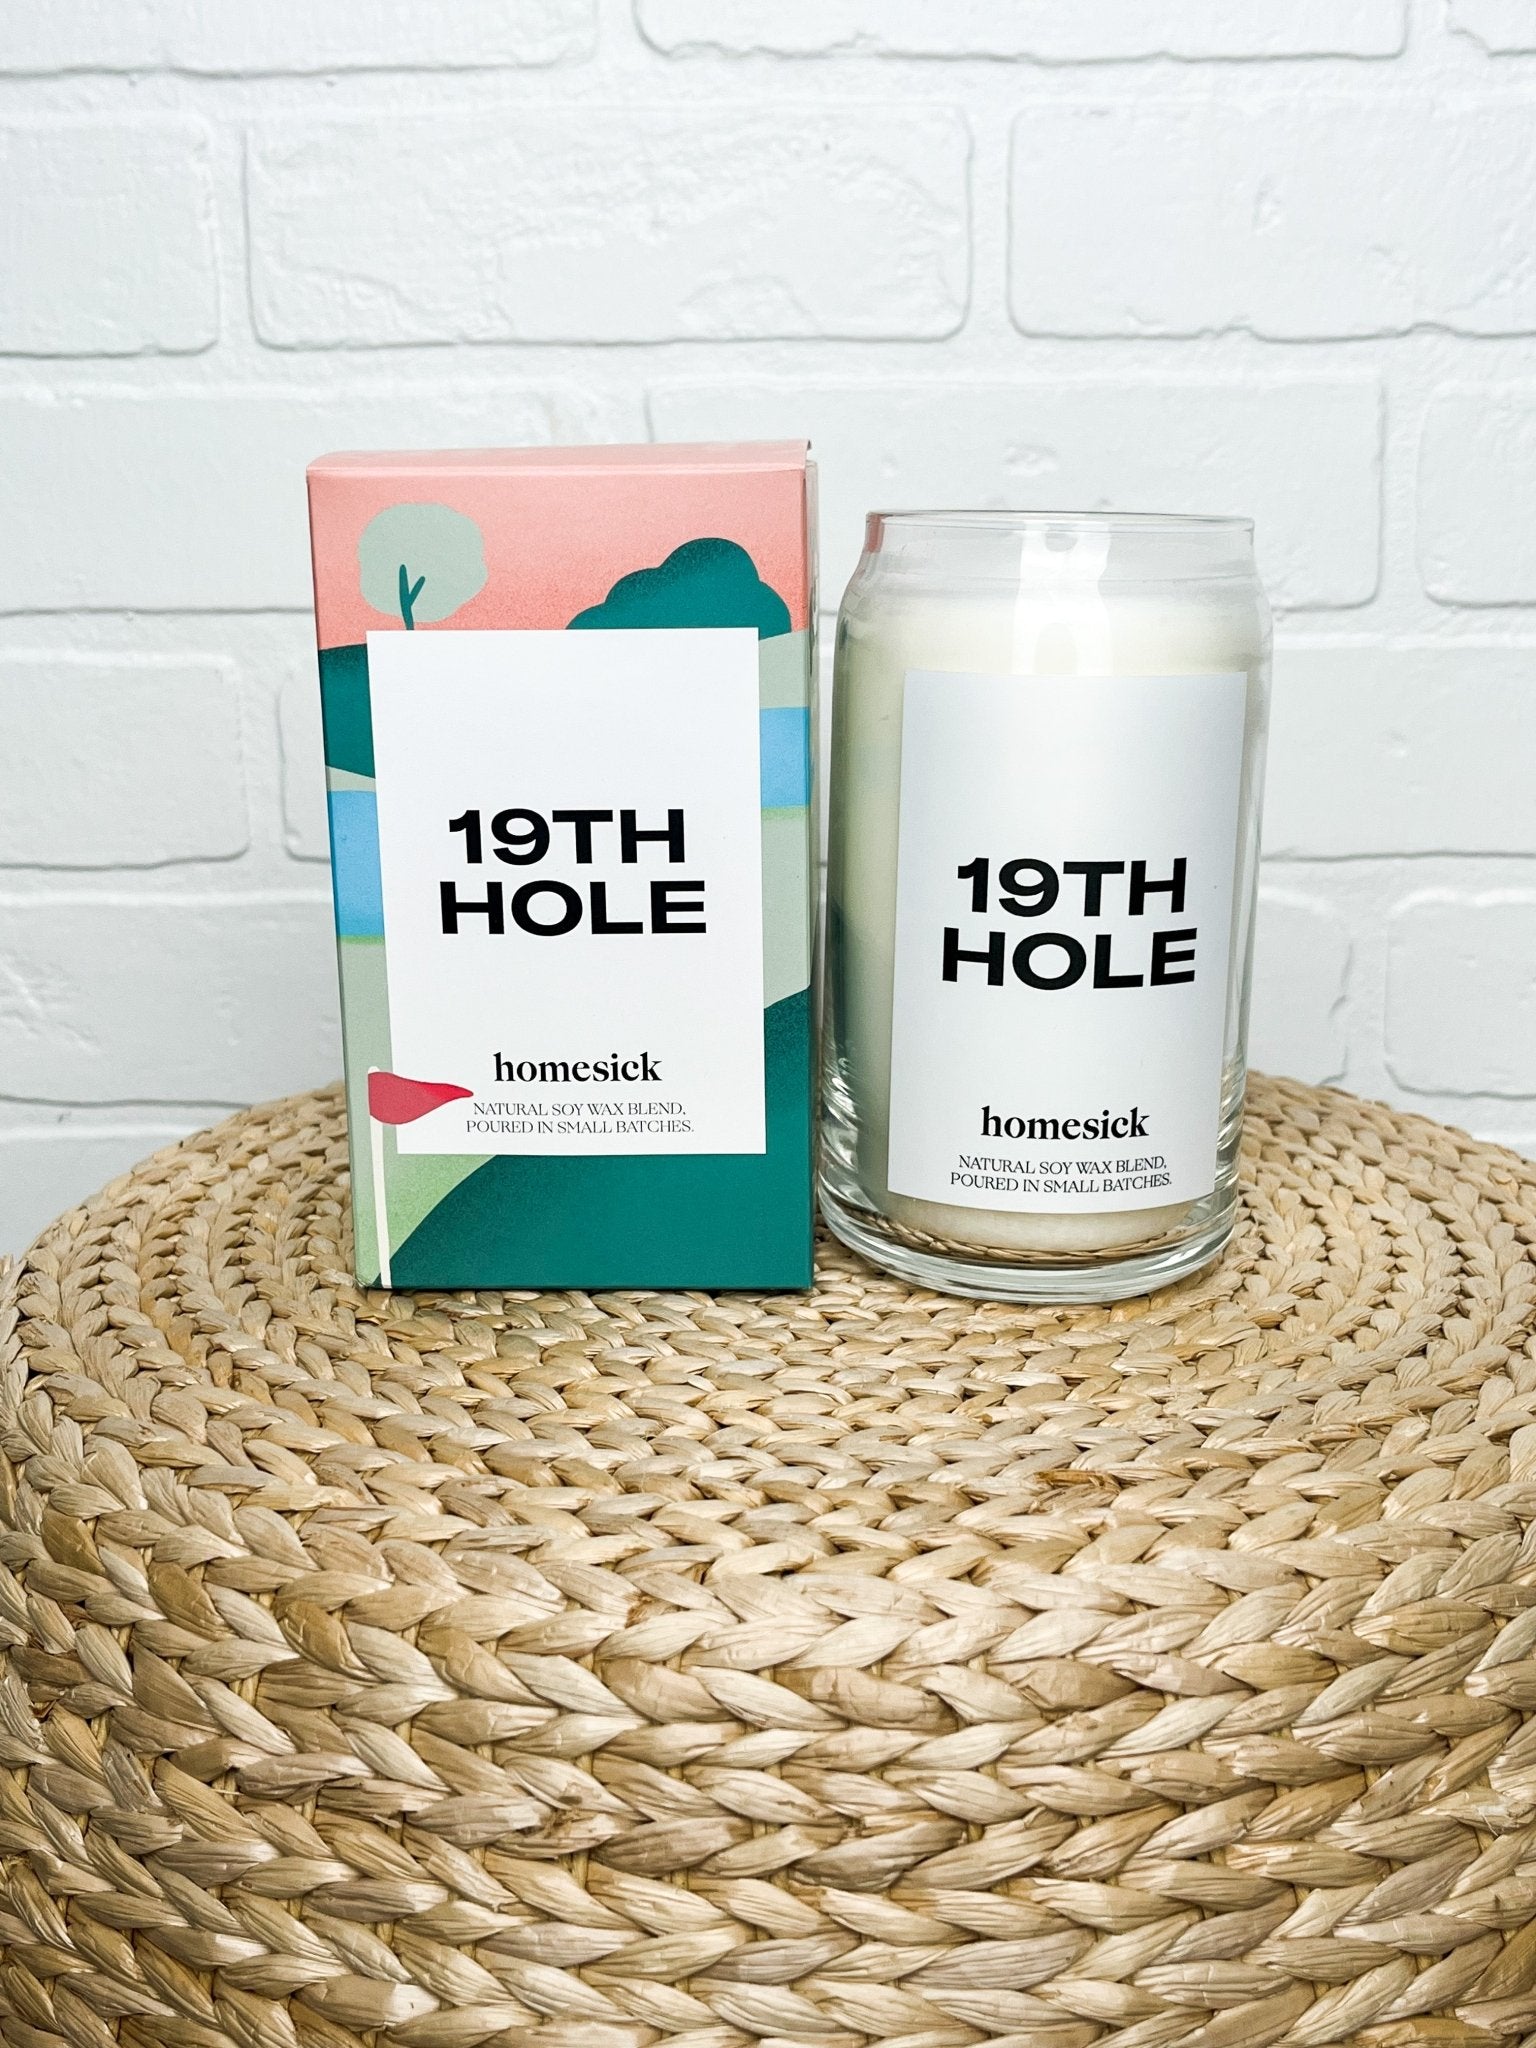 Homesick 19th hole candle - Trendy Candles at Lush Fashion Lounge Boutique in Oklahoma City